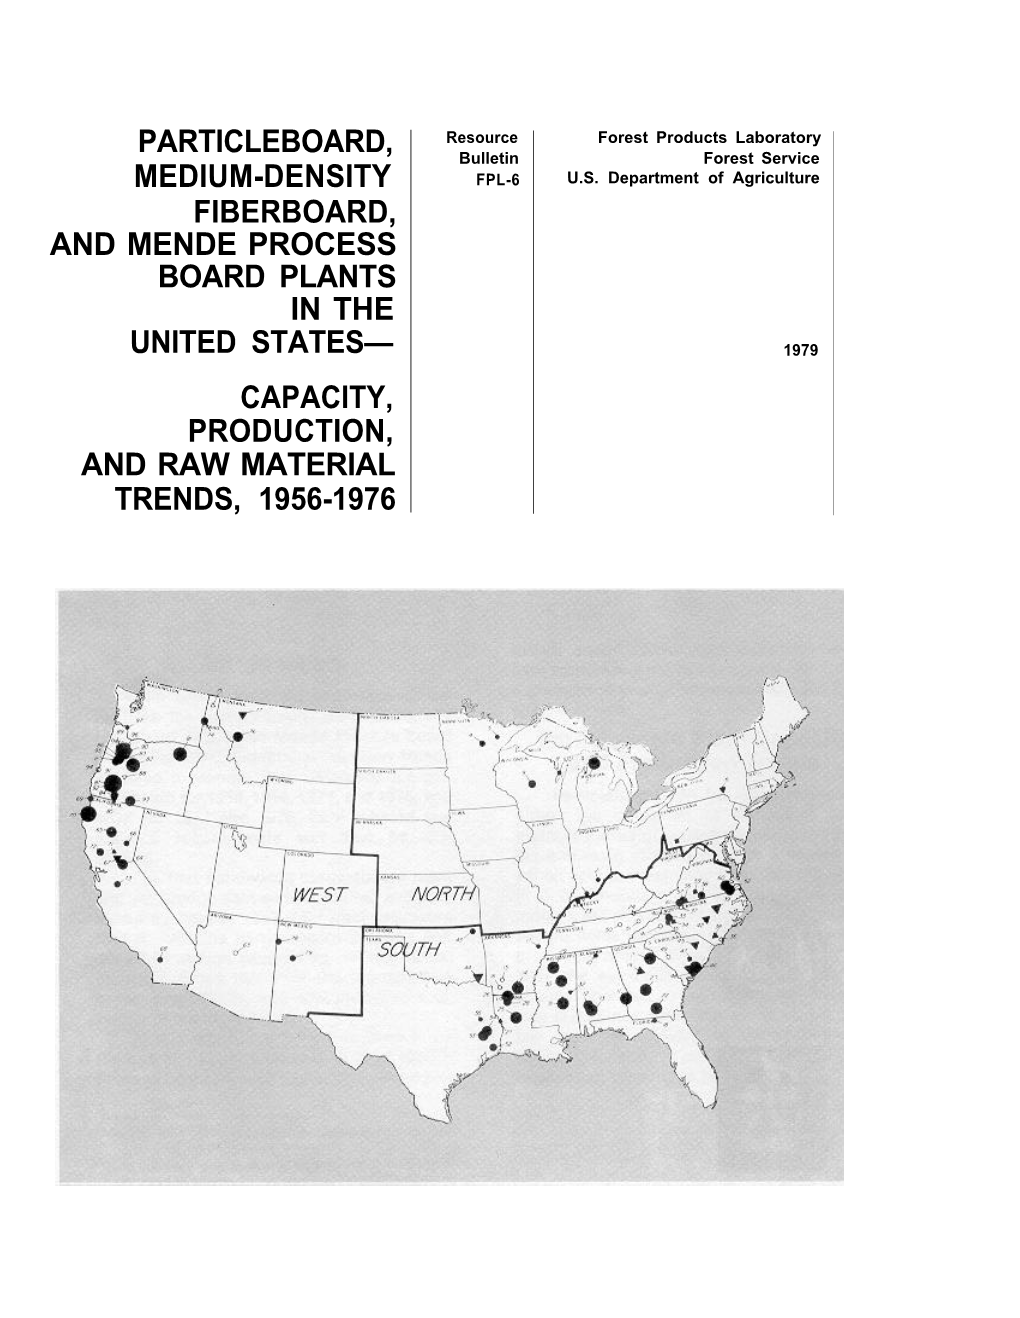 Particleboard, Medium-Density Fiberboard, and Mende Process Board Plants in the United States-Capacity, Production, and Raw Material Trends, 1956-1976